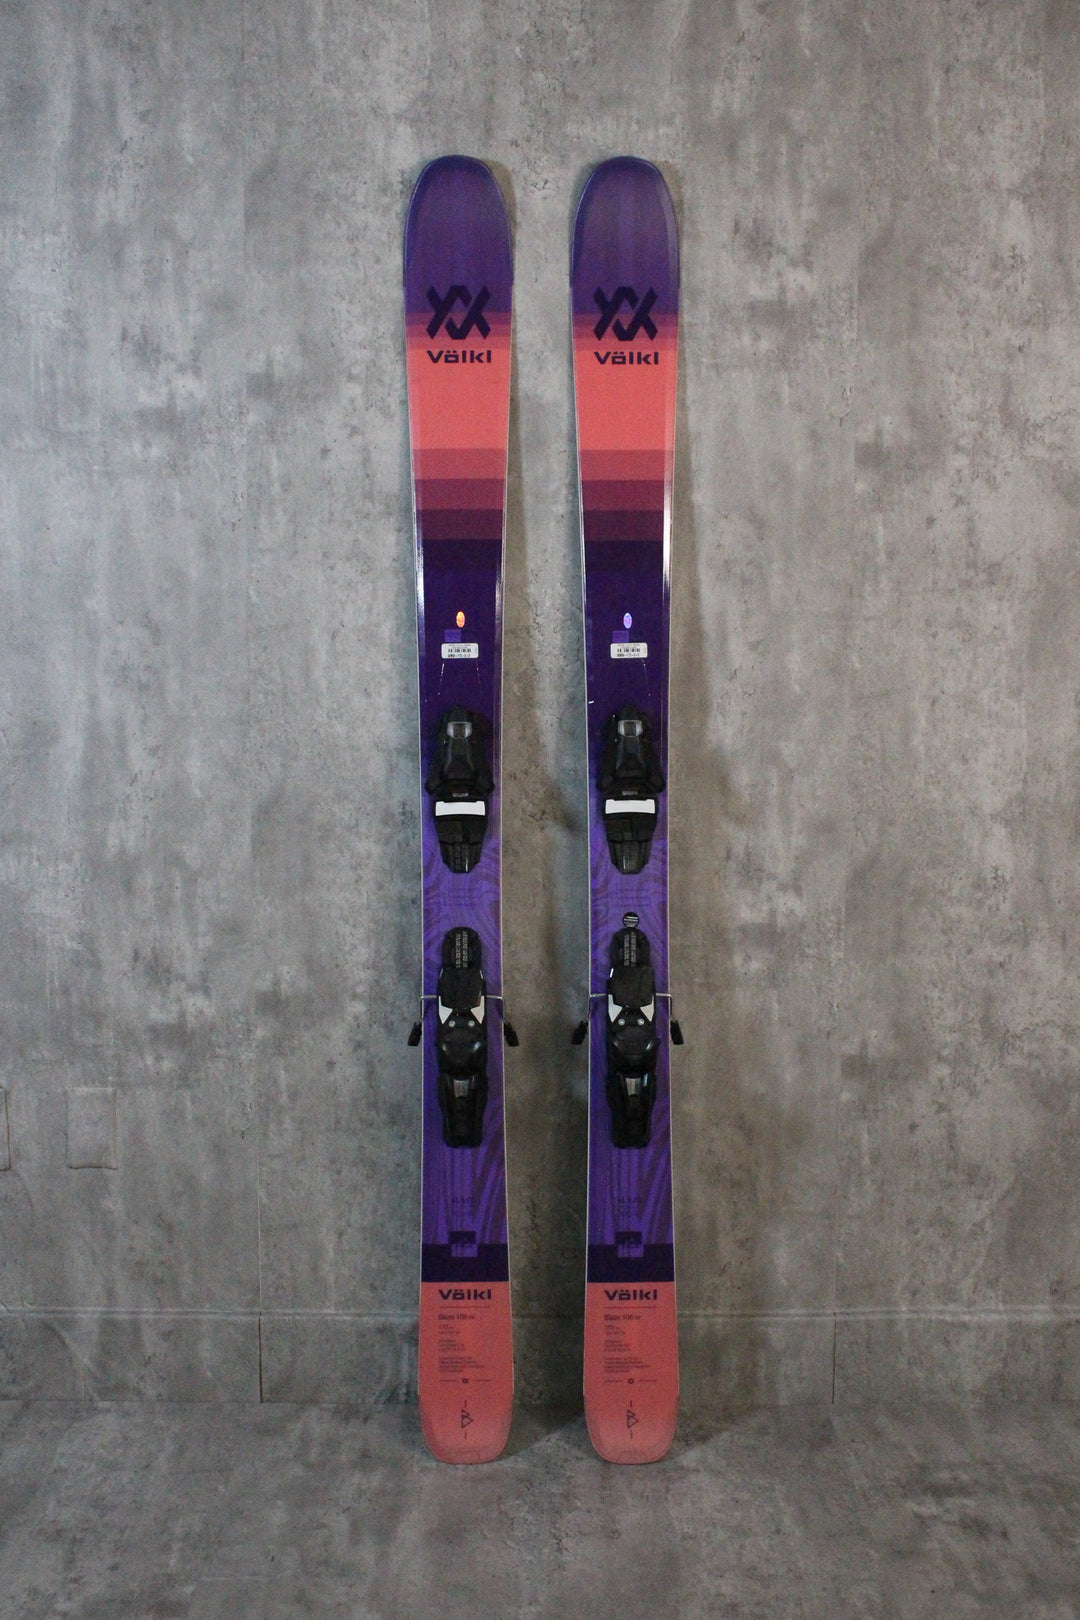 The Blaze 106 W is a lightweight, agile powder ski with a Titanal Binding Platform and Hybrid Woodcore, offering dynamic turns and stability in various snow conditions. Available as used skis in Park City.